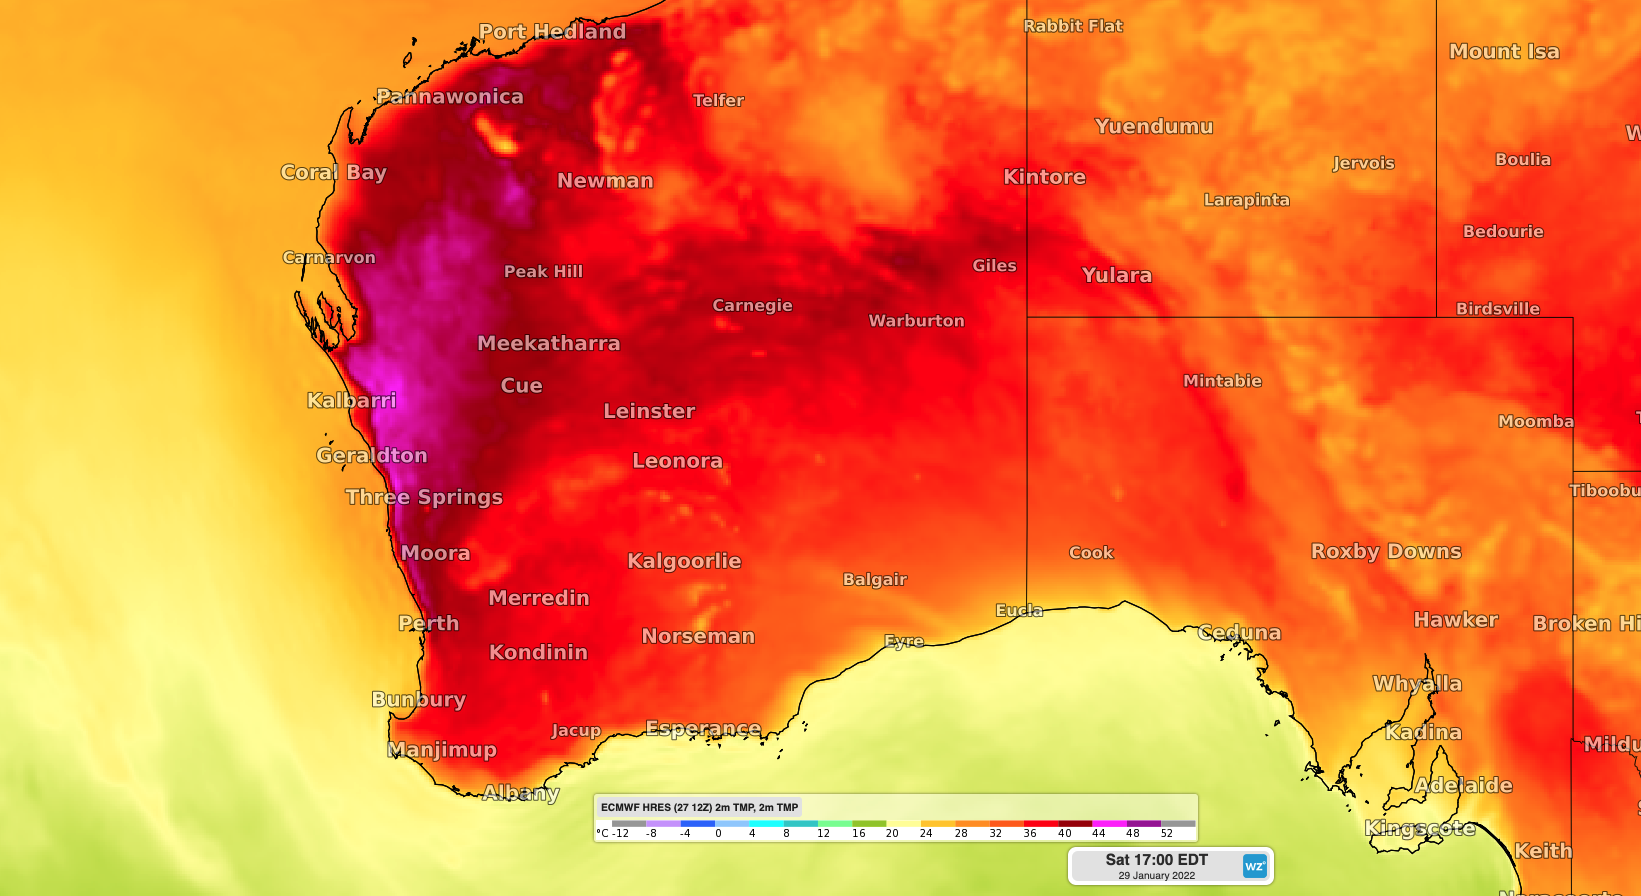 More hot days ahead in Perth